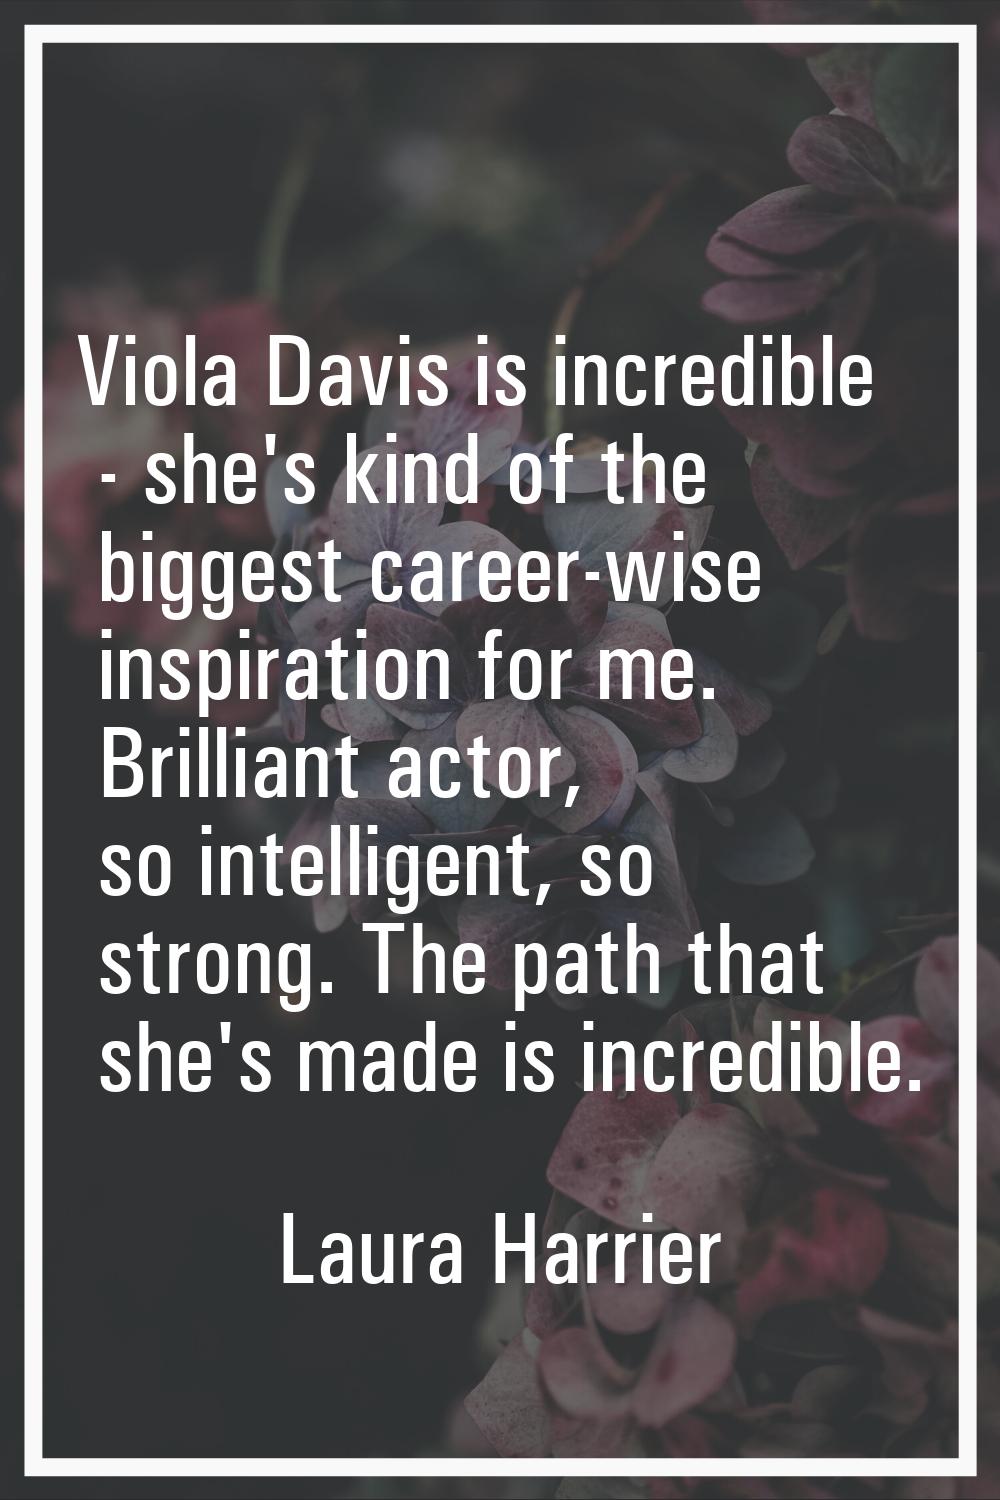 Viola Davis is incredible - she's kind of the biggest career-wise inspiration for me. Brilliant act